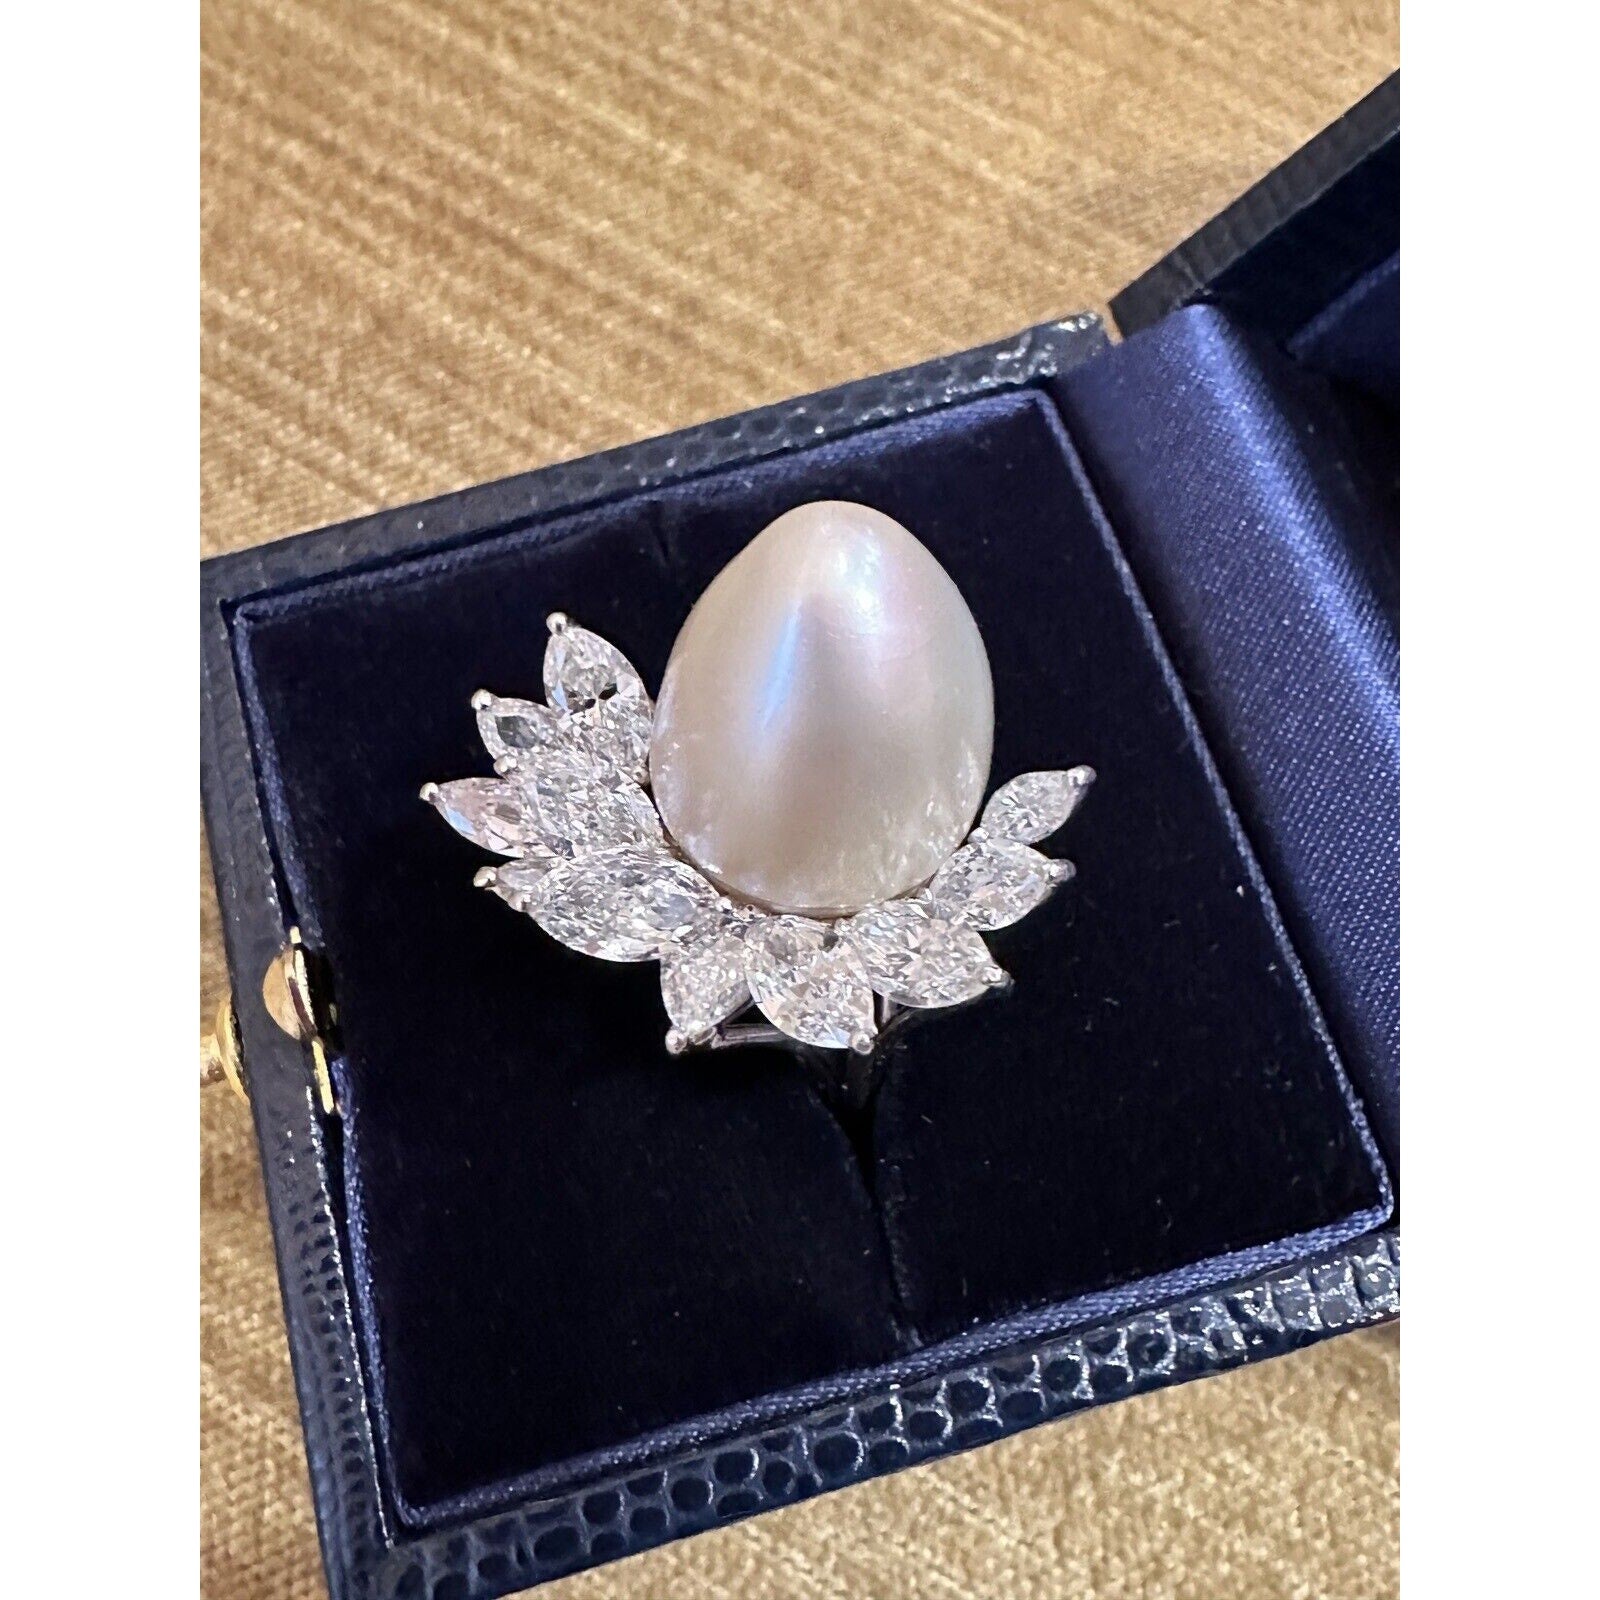 Large South Sea Pearl & Diamond Cocktail Ring by Tibor in Platinum - HM2528A